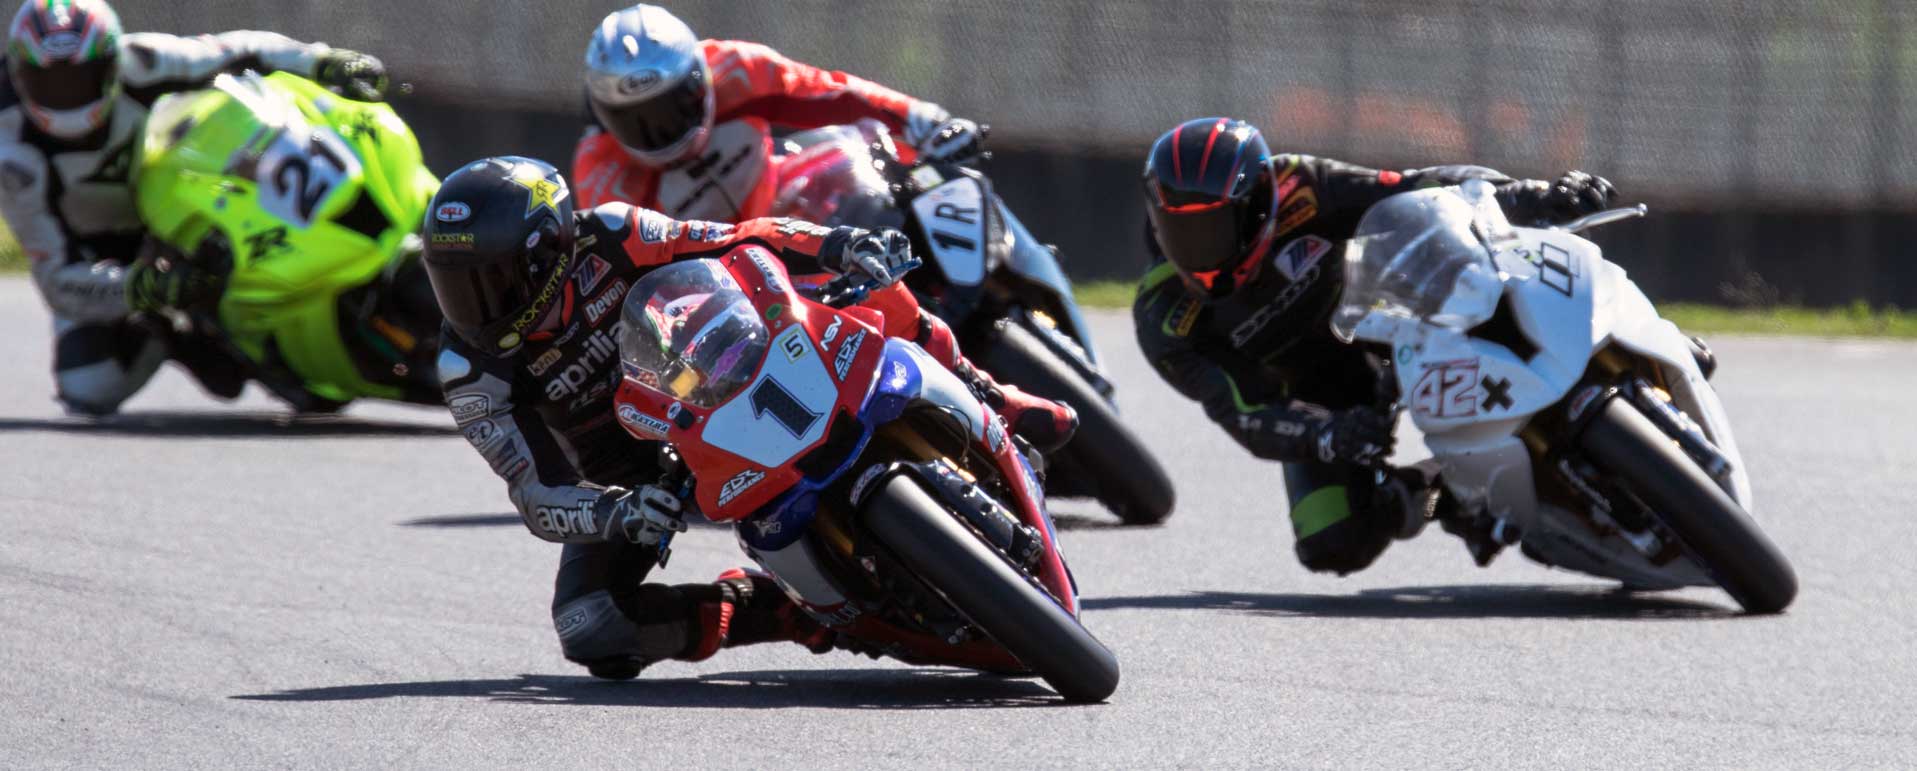 Andy DiBrino on his R1 at Portland International Raceway round 2 OMRRA championship series, leaned hard, going fast into turn